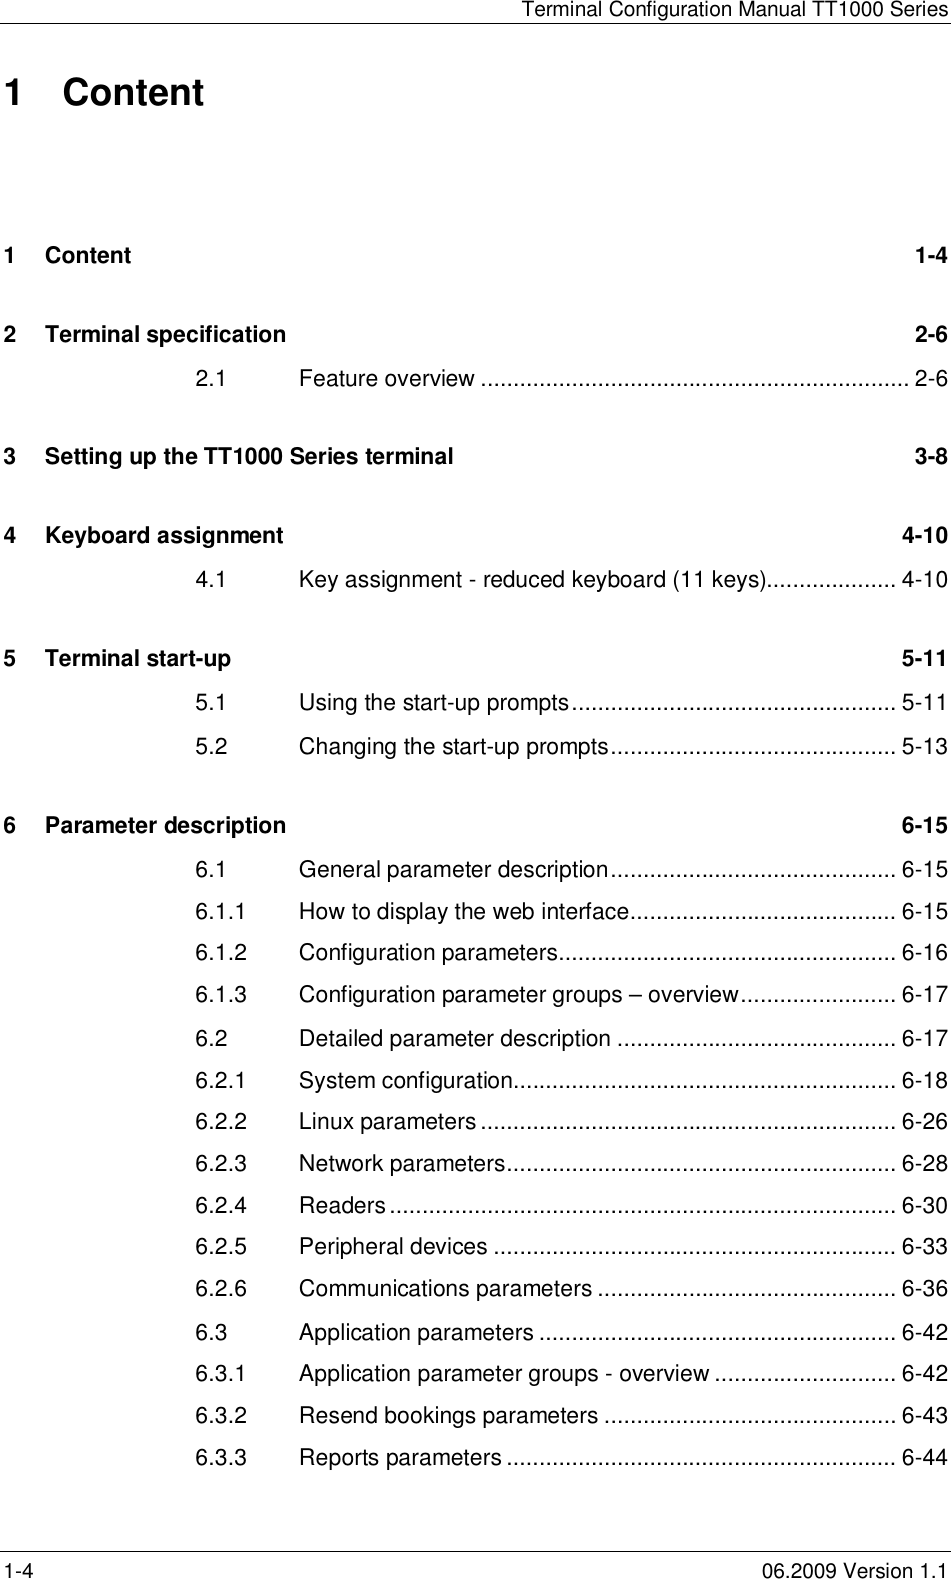 Terminal Configuration Manual TT1000 Series1-4 06.2009 Version 1.11 Content1Content 1-42Terminal specification 2-62.1 Feature overview .................................................................. 2-63Setting up the TT1000 Series terminal 3-84Keyboard assignment 4-104.1 Key assignment - reduced keyboard (11 keys).................... 4-105Terminal start-up 5-115.1 Using the start-up prompts.................................................. 5-115.2 Changing the start-up prompts............................................ 5-136Parameter description 6-156.1 General parameter description............................................ 6-156.1.1 How to display the web interface......................................... 6-156.1.2 Configuration parameters.................................................... 6-166.1.3 Configuration parameter groups – overview........................ 6-176.2 Detailed parameter description ........................................... 6-176.2.1 System configuration........................................................... 6-186.2.2 Linux parameters ................................................................ 6-266.2.3 Network parameters............................................................ 6-286.2.4 Readers.............................................................................. 6-306.2.5 Peripheral devices .............................................................. 6-336.2.6 Communications parameters .............................................. 6-366.3 Application parameters ....................................................... 6-426.3.1 Application parameter groups - overview ............................ 6-426.3.2 Resend bookings parameters ............................................. 6-436.3.3 Reports parameters ............................................................ 6-44